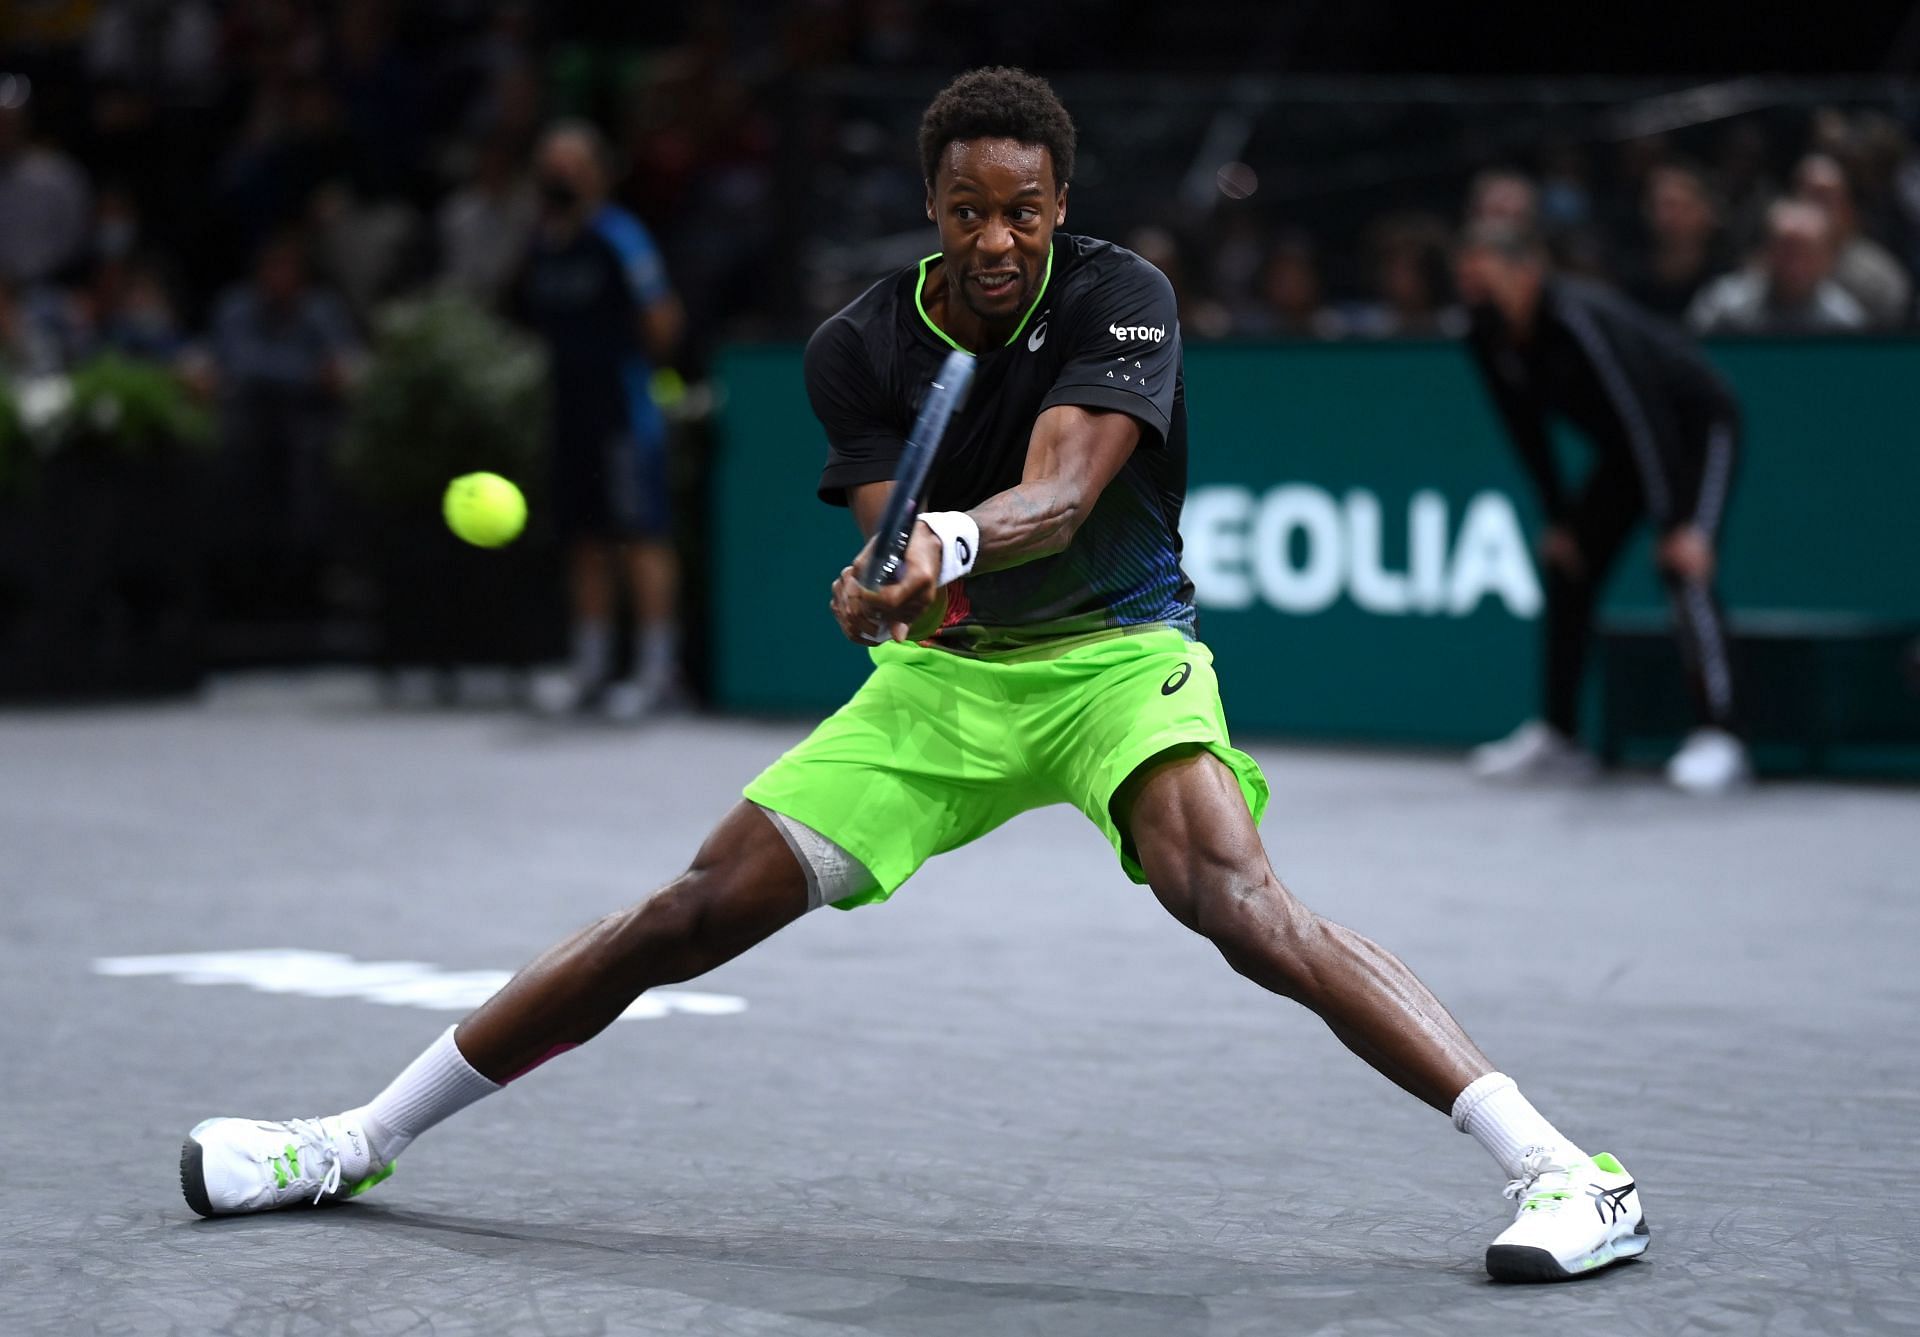 Gael Monfils is the top seed at the Adelaide International 2